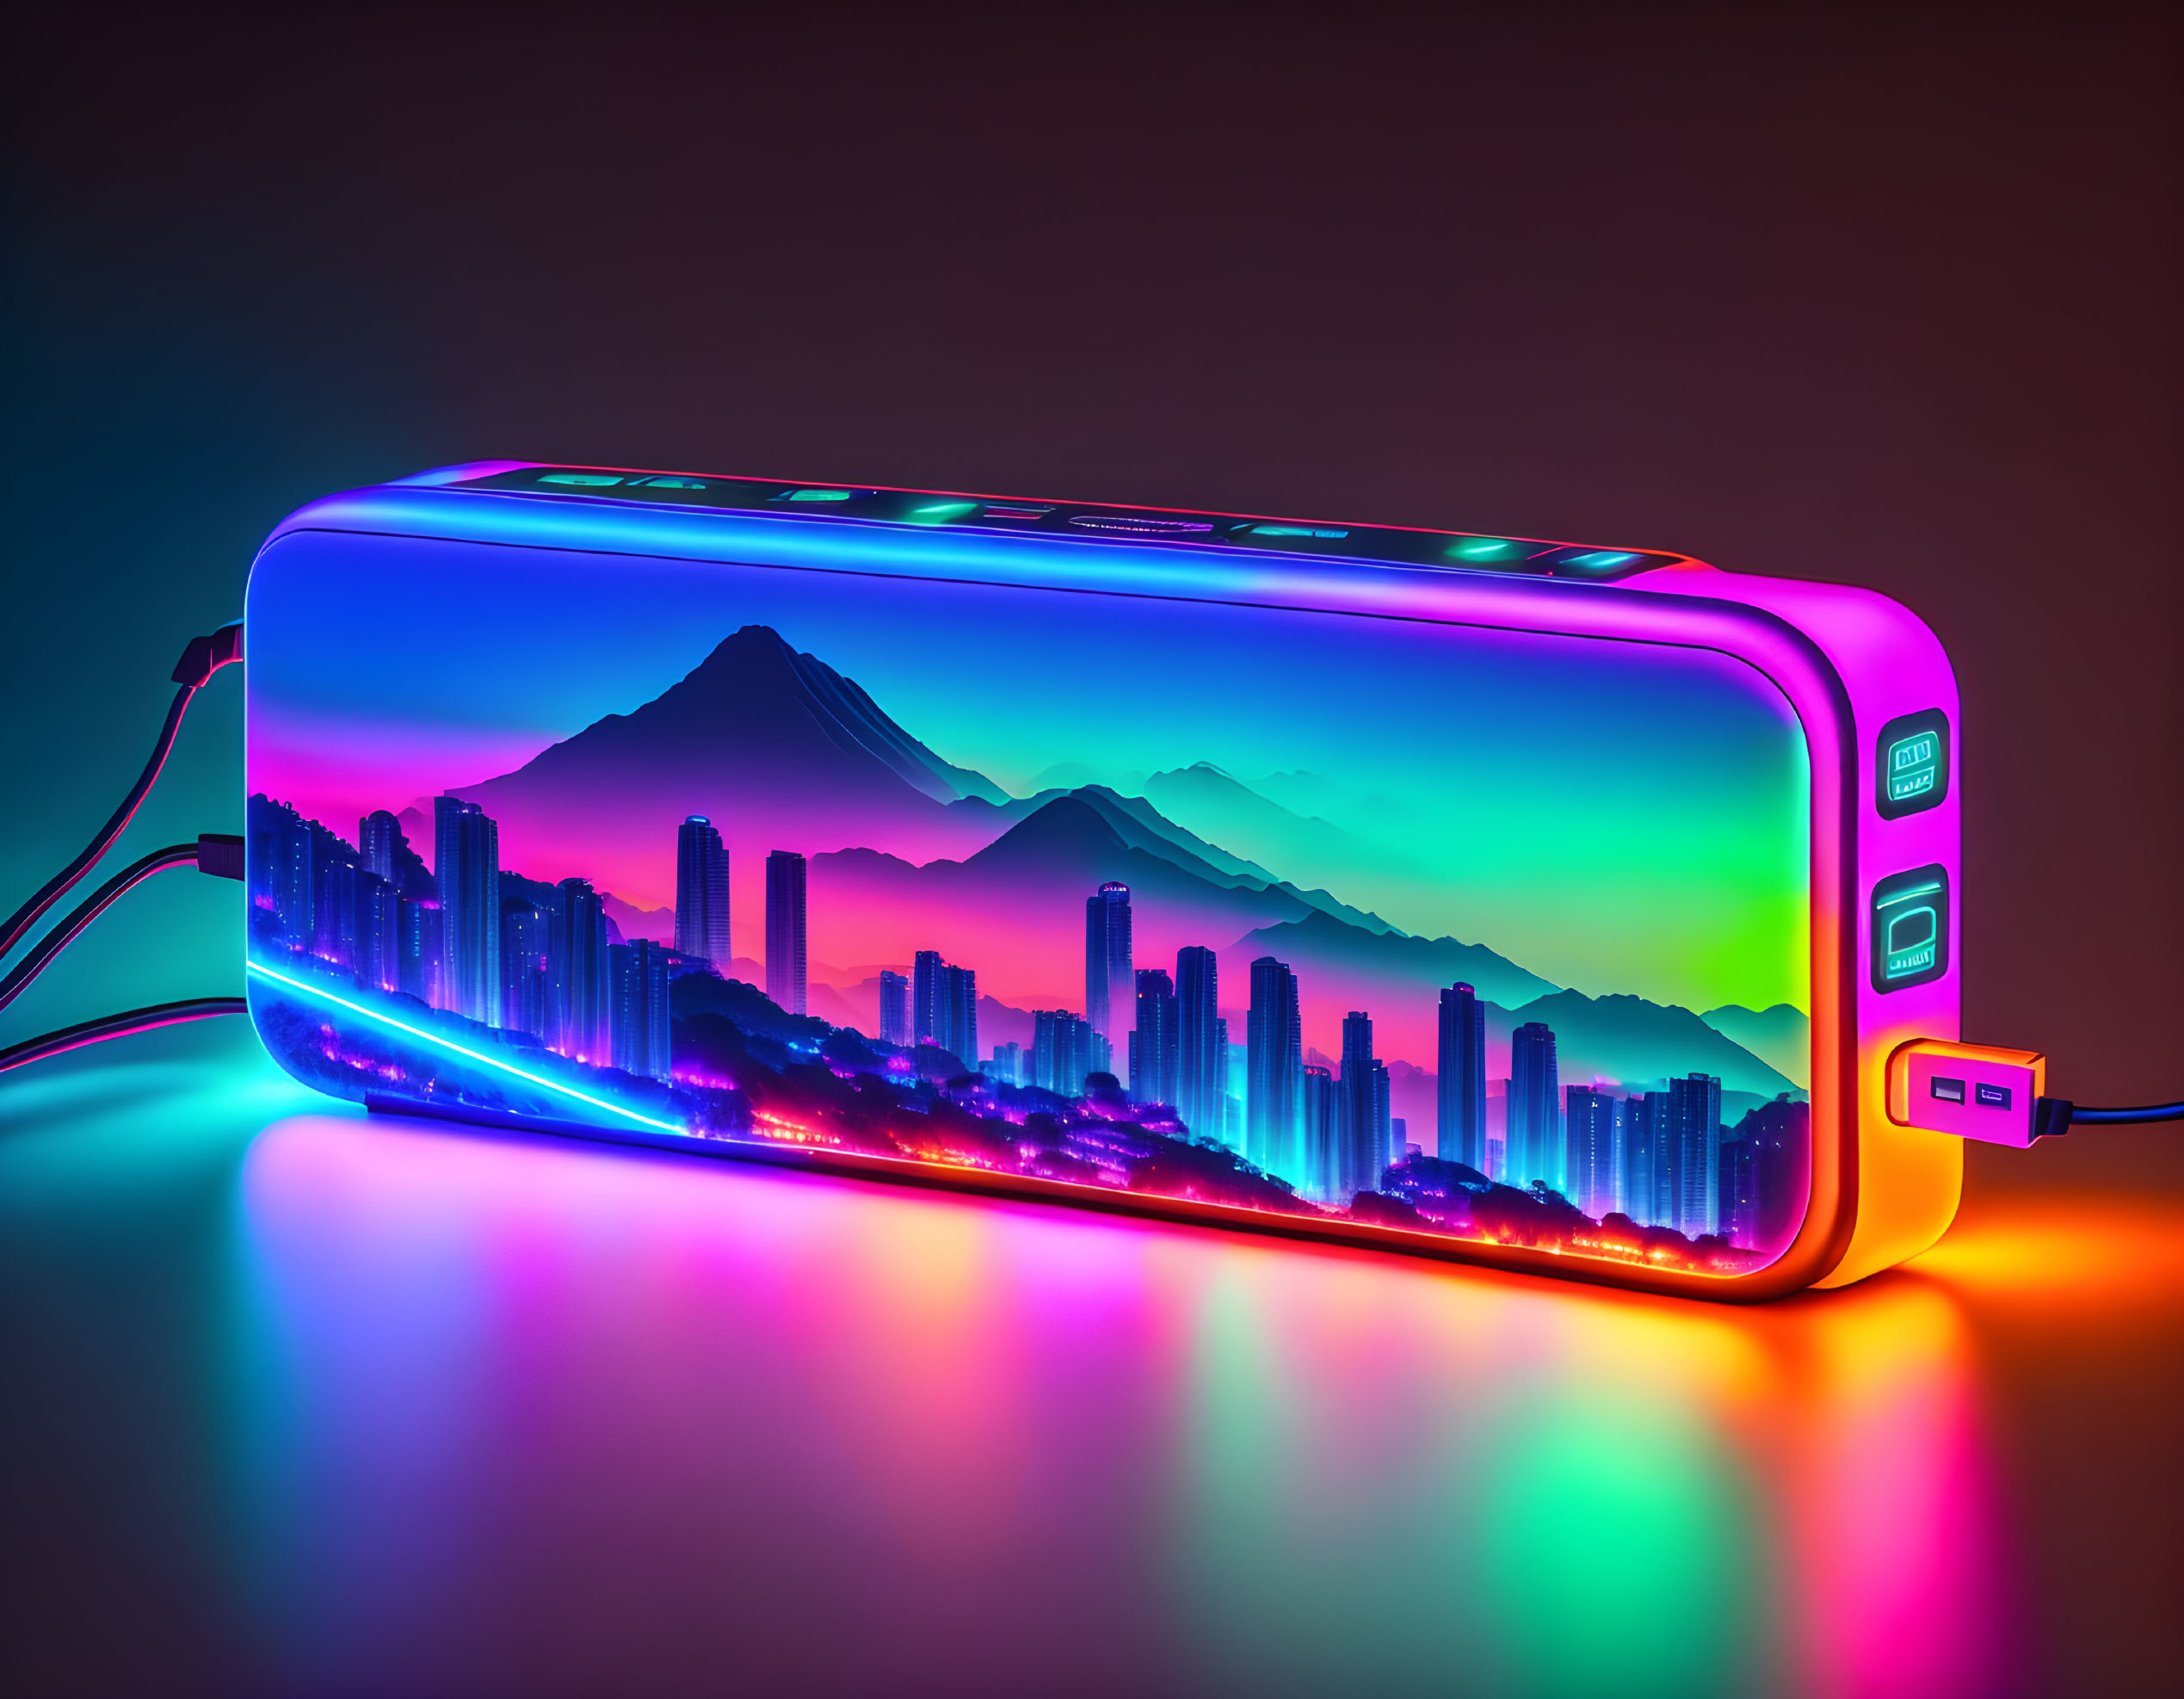 Vibrant Neon Lights on Modern Portable Speaker with Cityscape and Mountain Silhouette